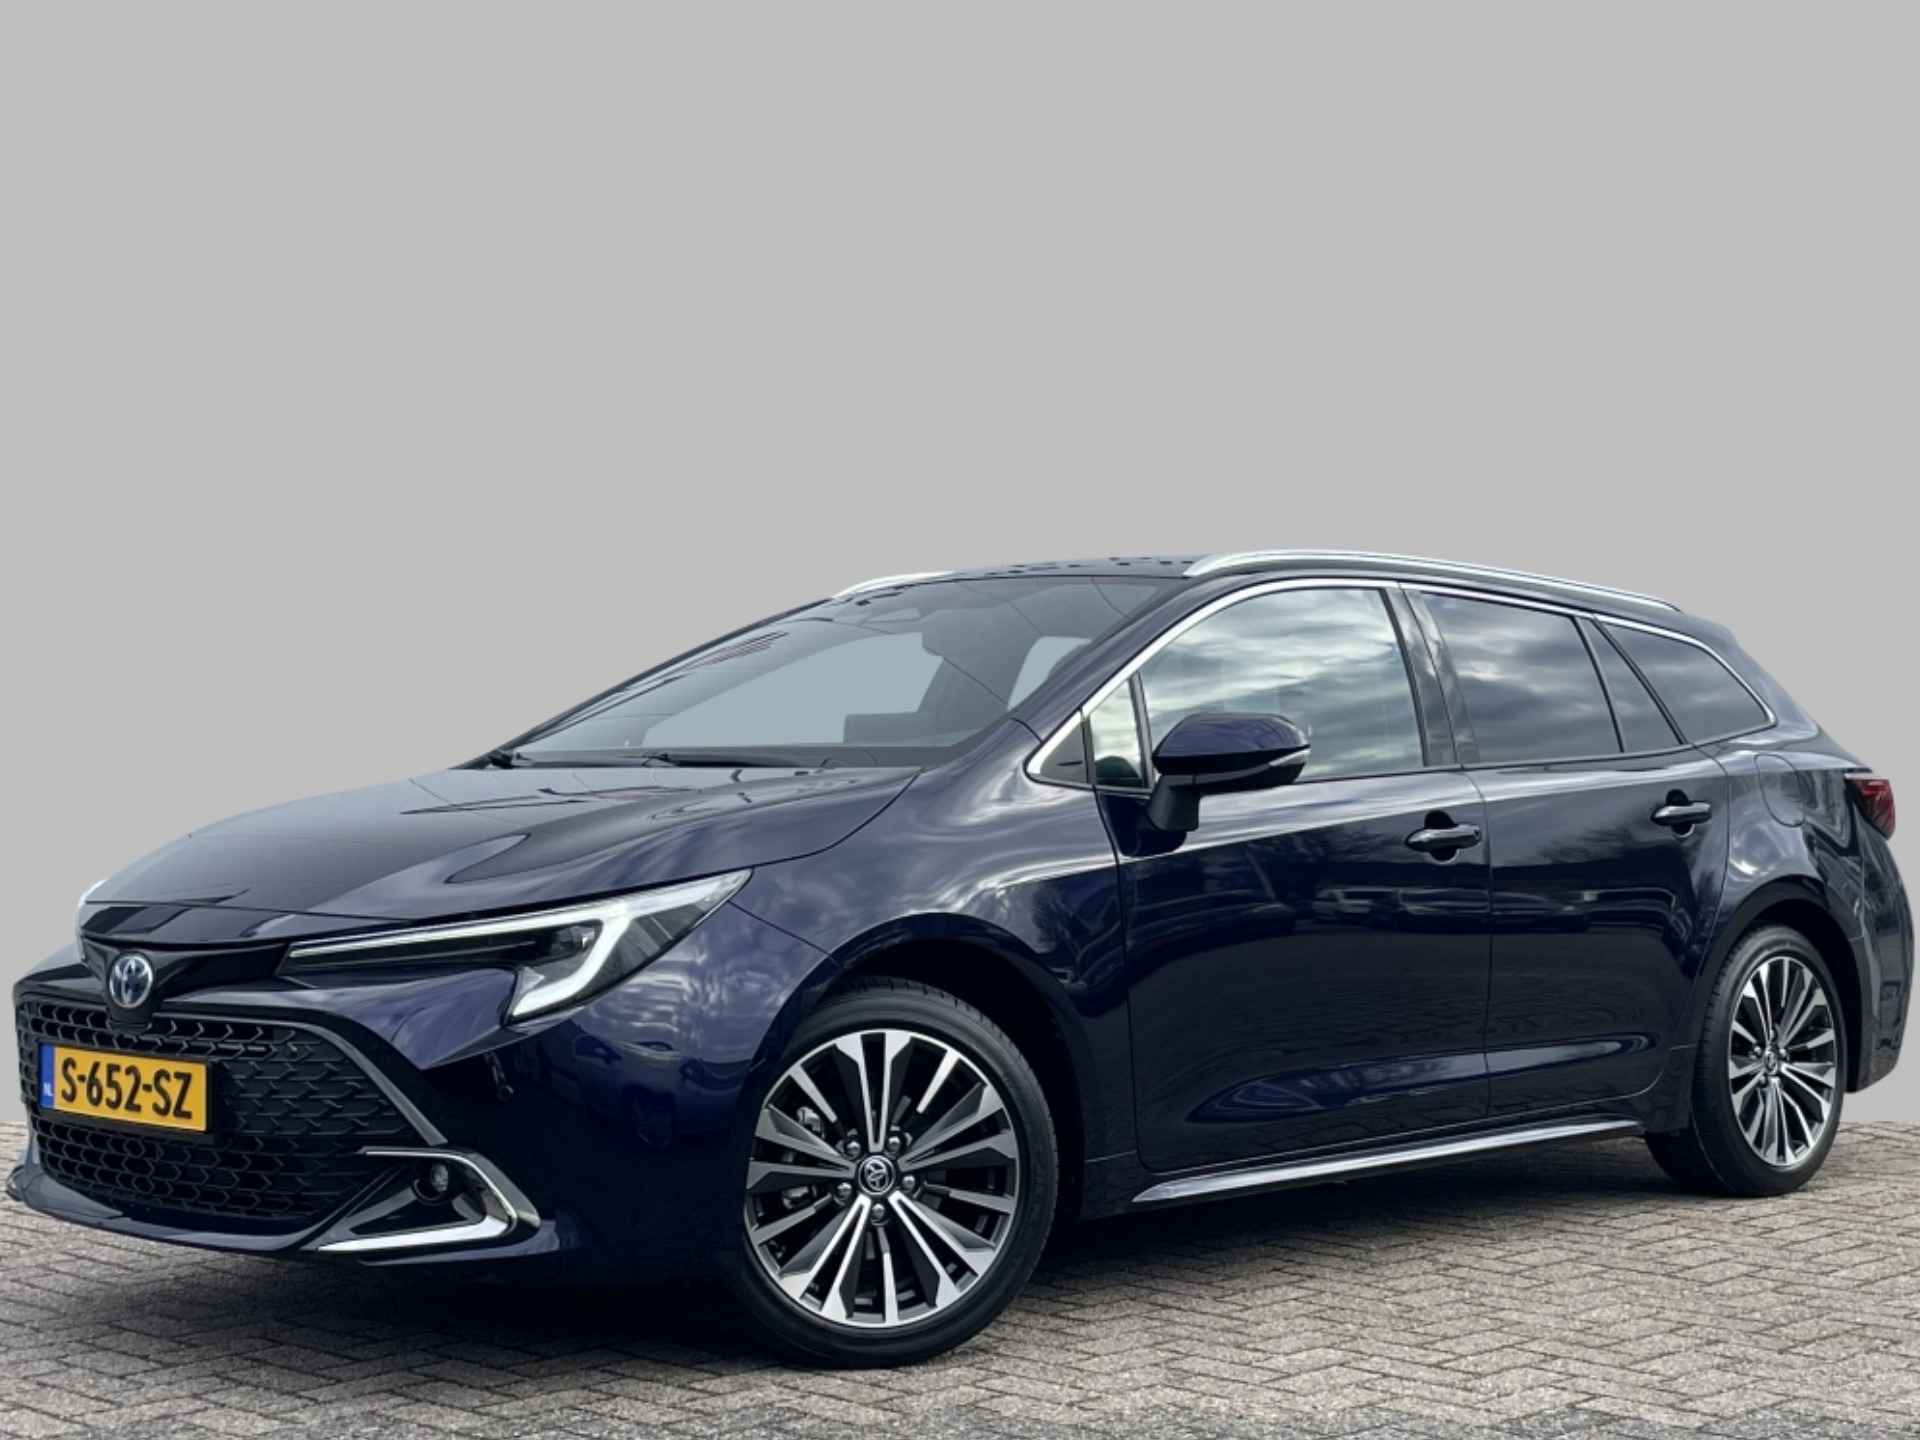 Toyota Corolla Touring Sports 1.8 Hybrid First Edition Automaat 140PK Demo Navi Cruise PDC Cli - 1/32